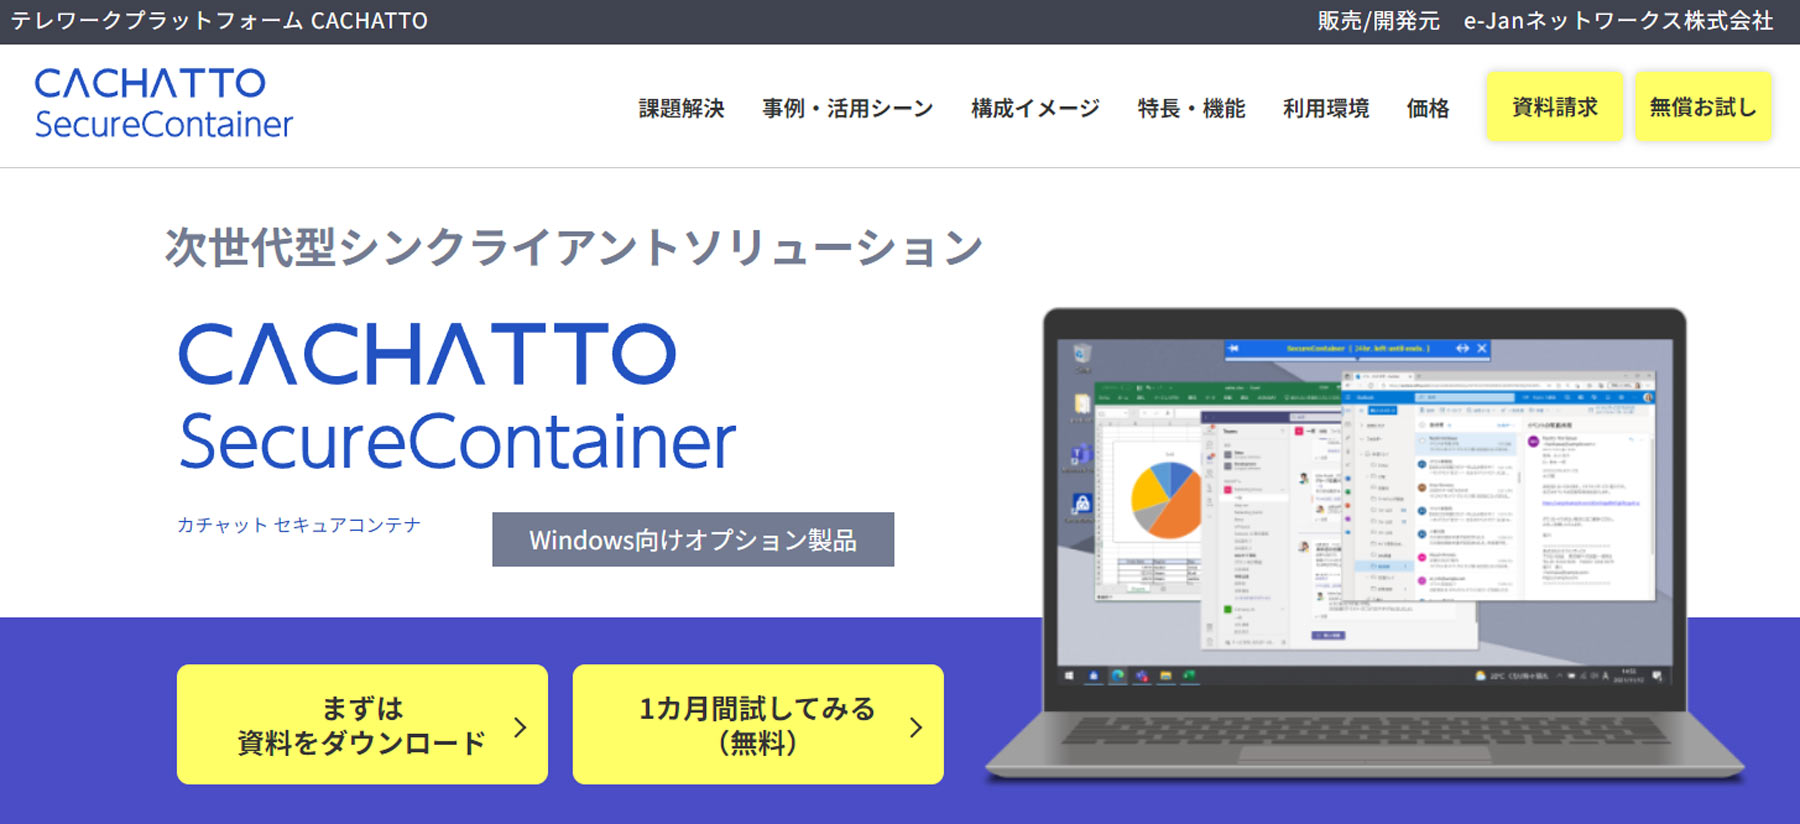 CACHATTO SecureContainer公式Webサイト